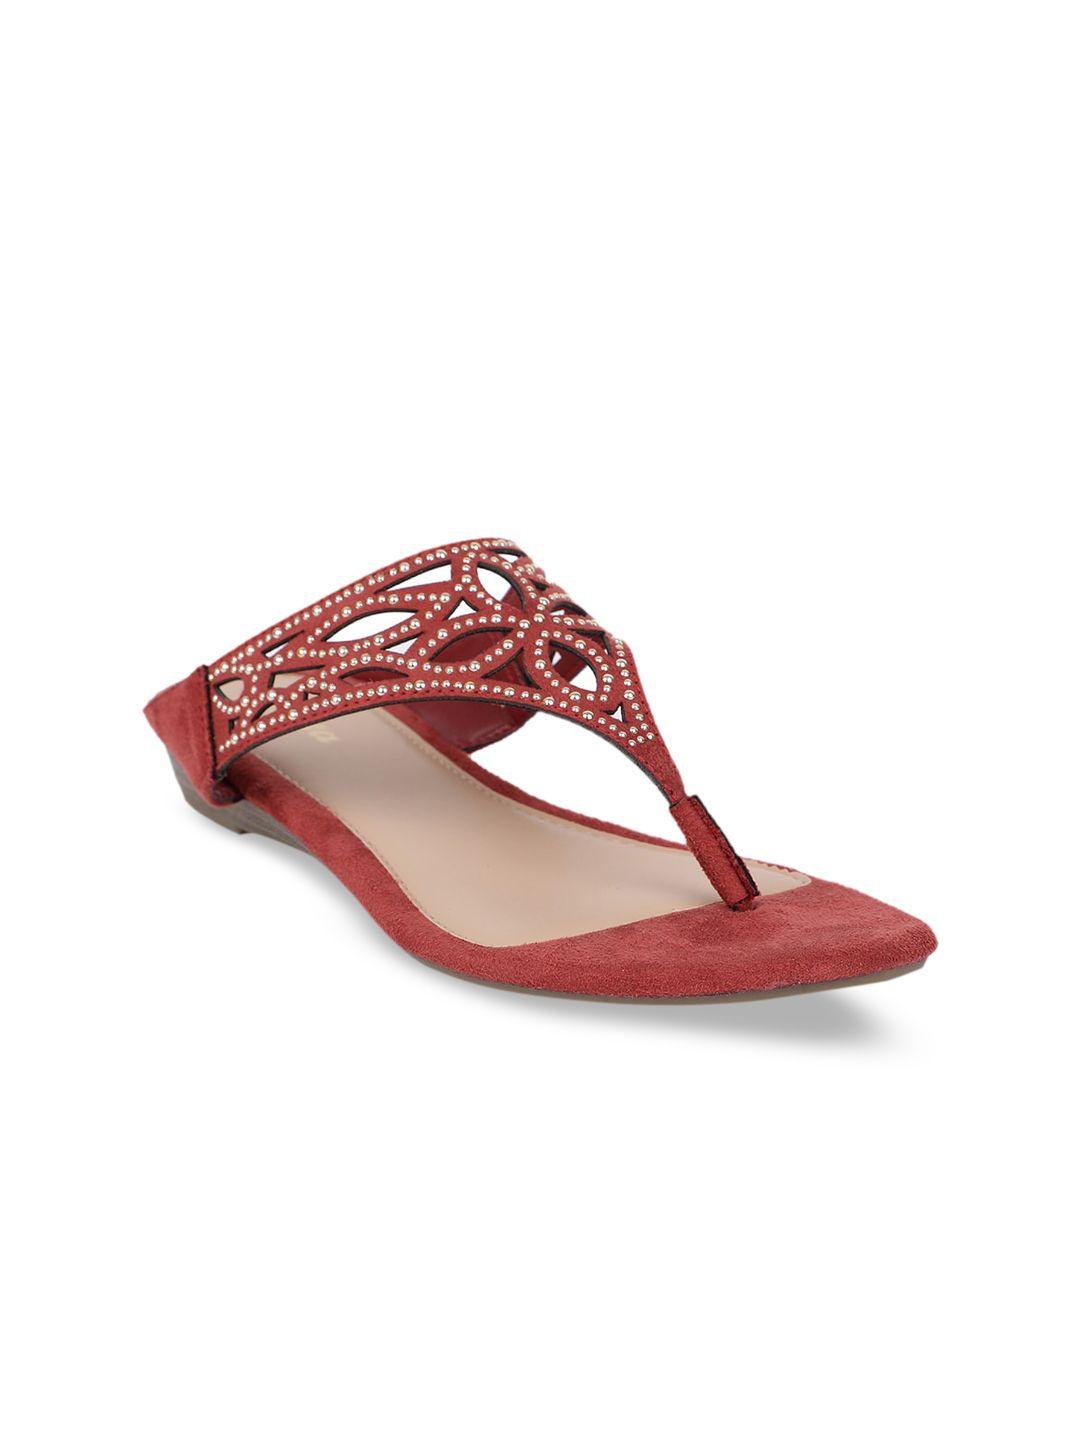 bata women red & off-white embellished open toe flats